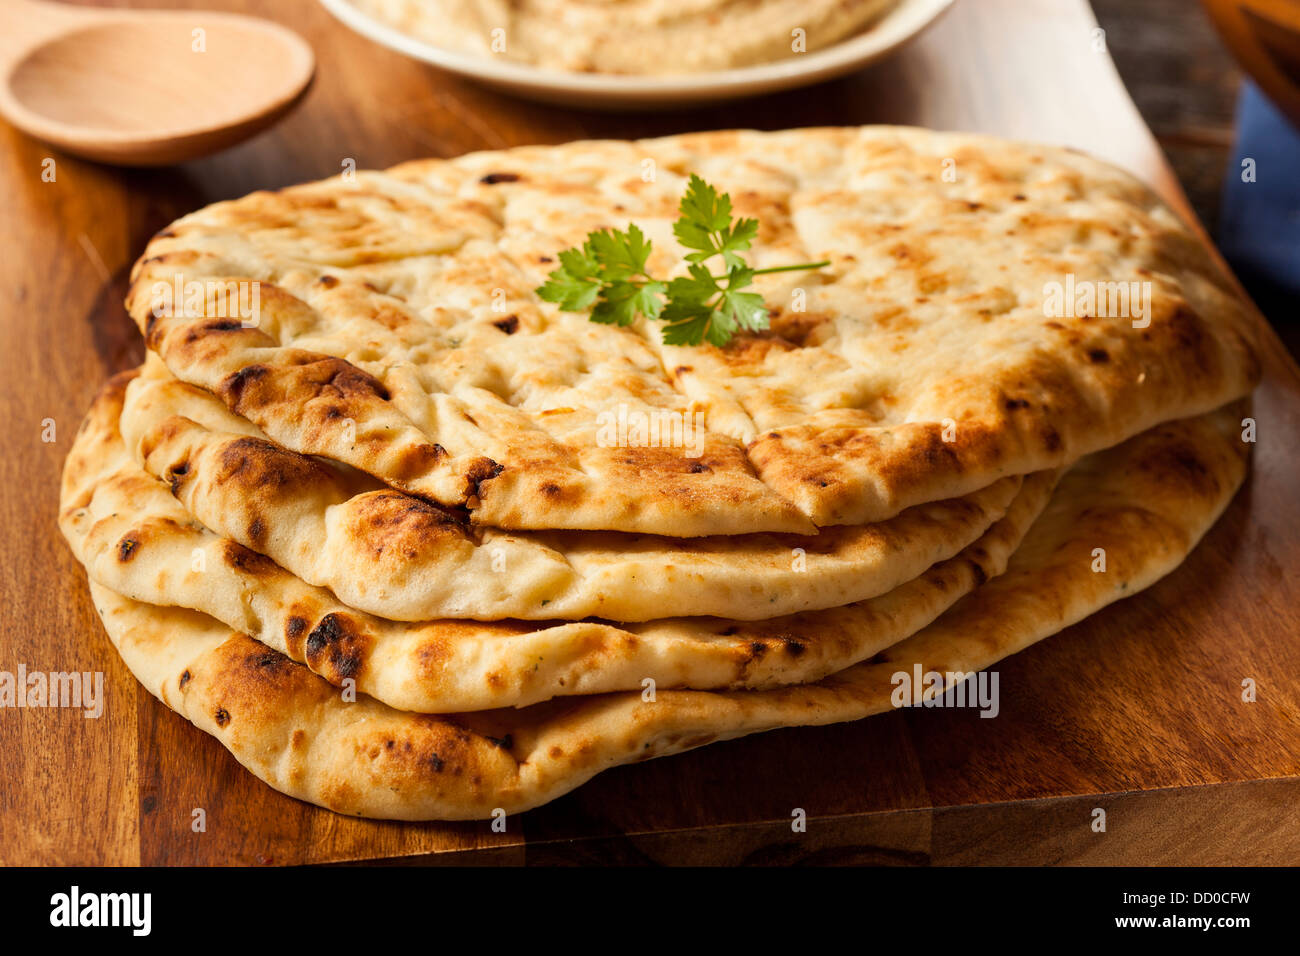 Homemade Indian Naan Flatbread made with Whole Wheat Stock Photo